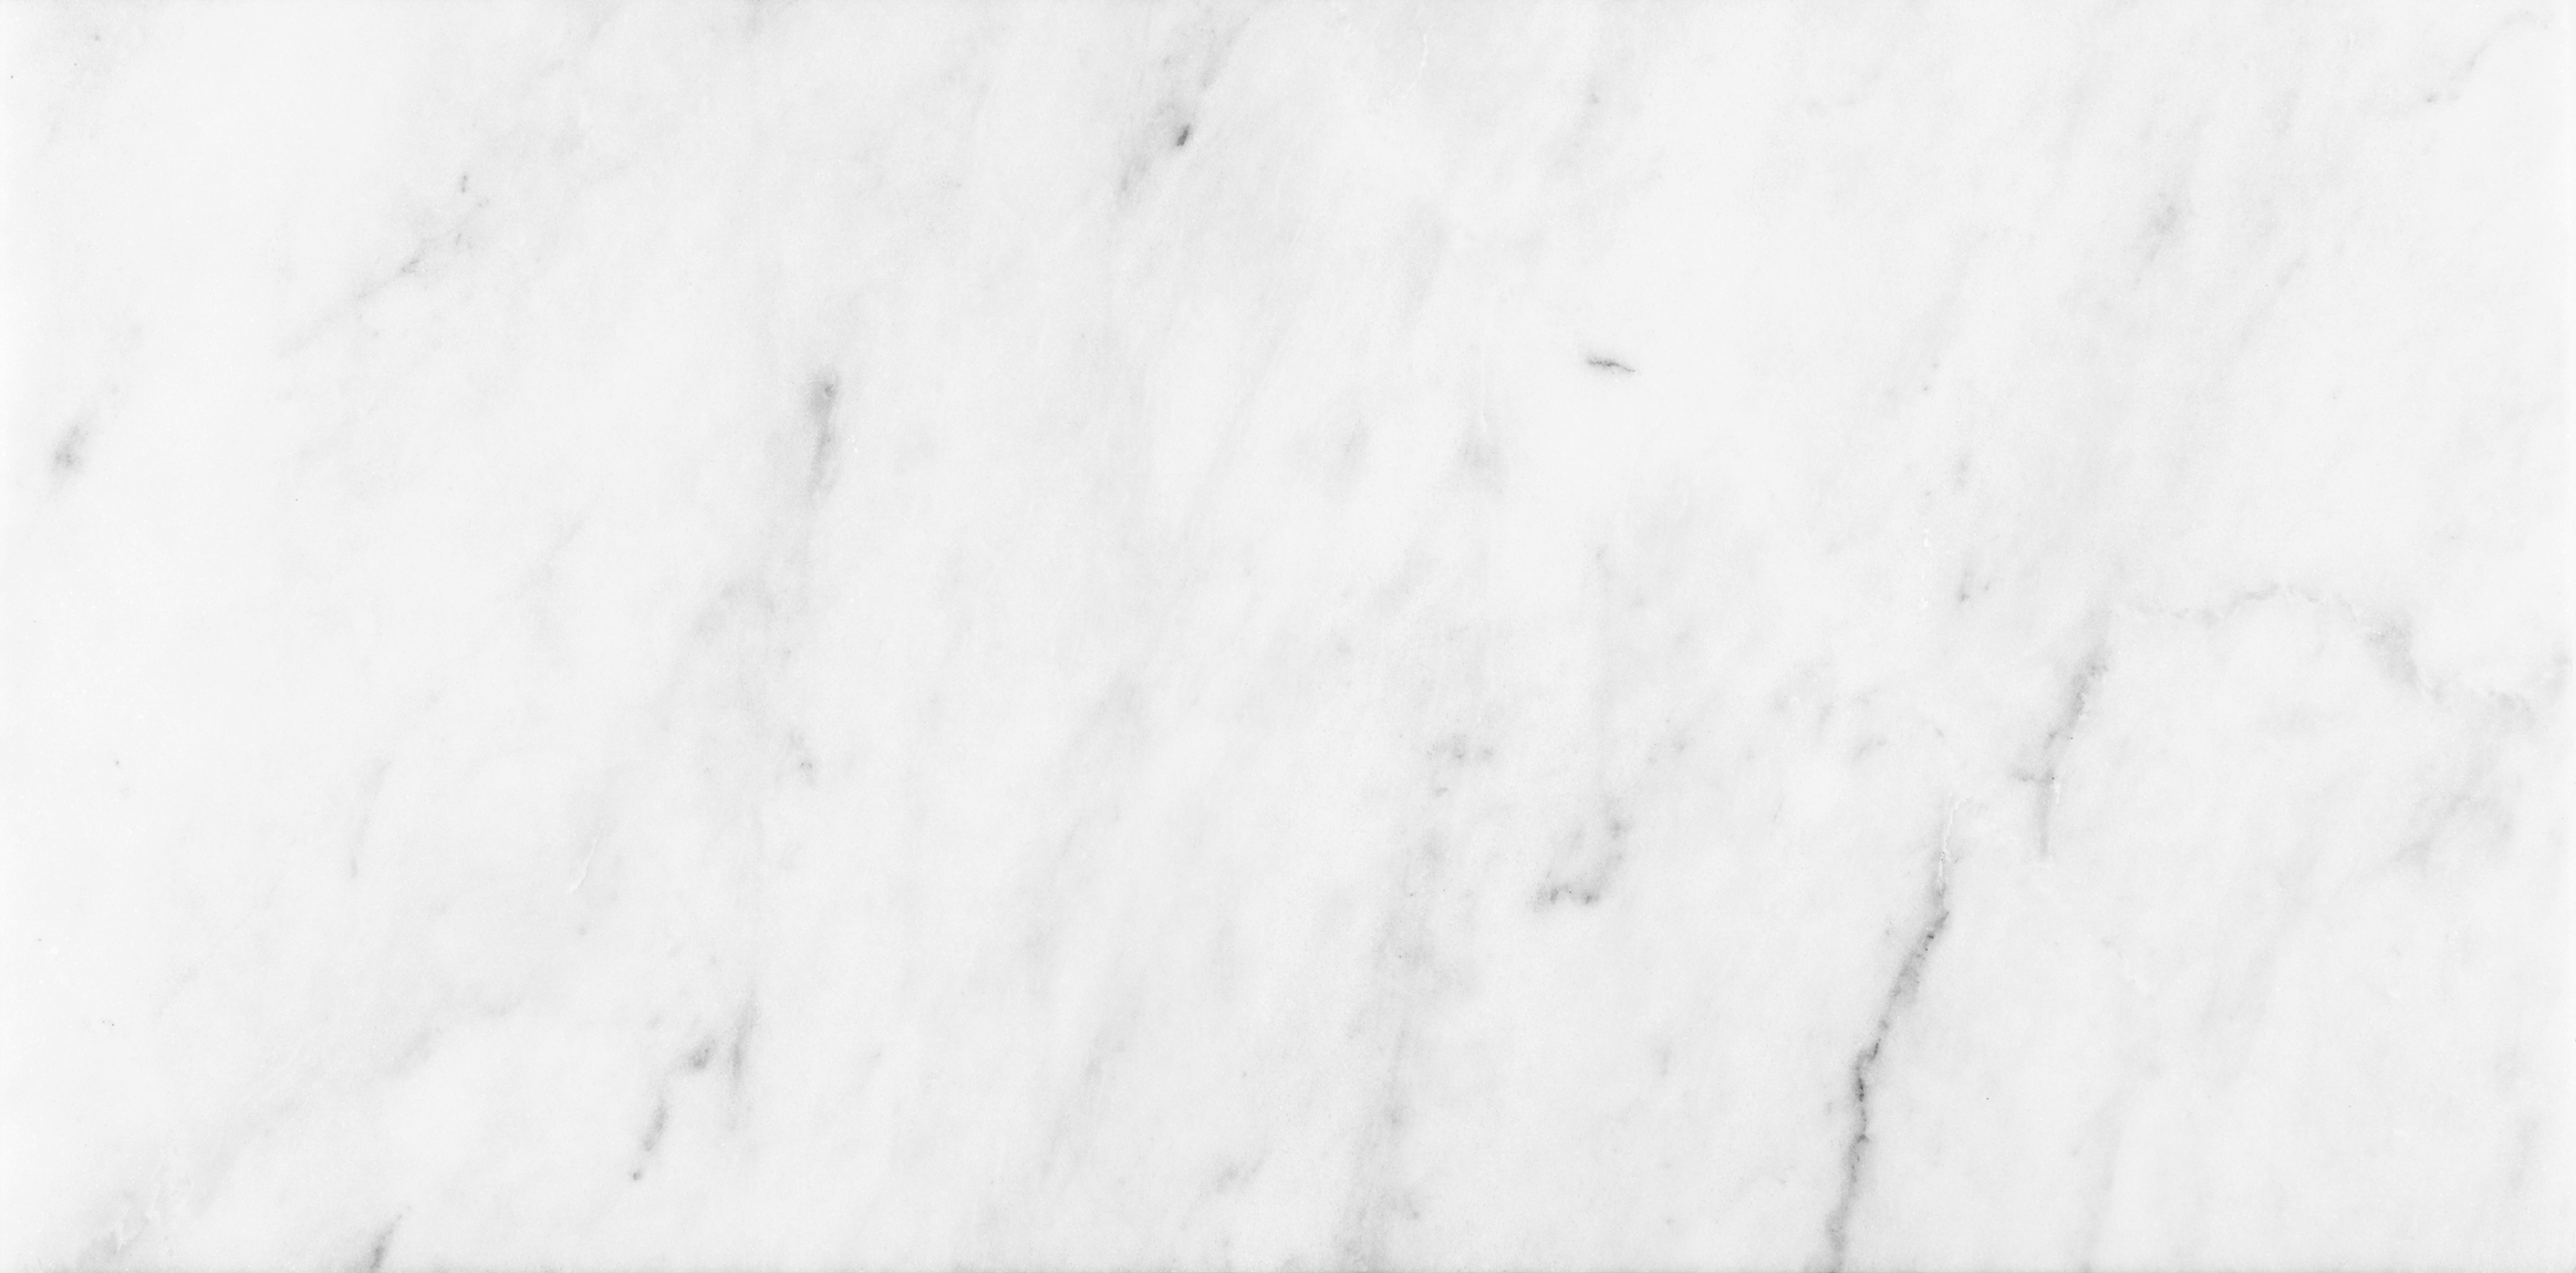 marble pattern natural stone field tile from bianco venatino anatolia collection distributed by surface group international polished finish micro beveled edge 12x24 rectangle shape